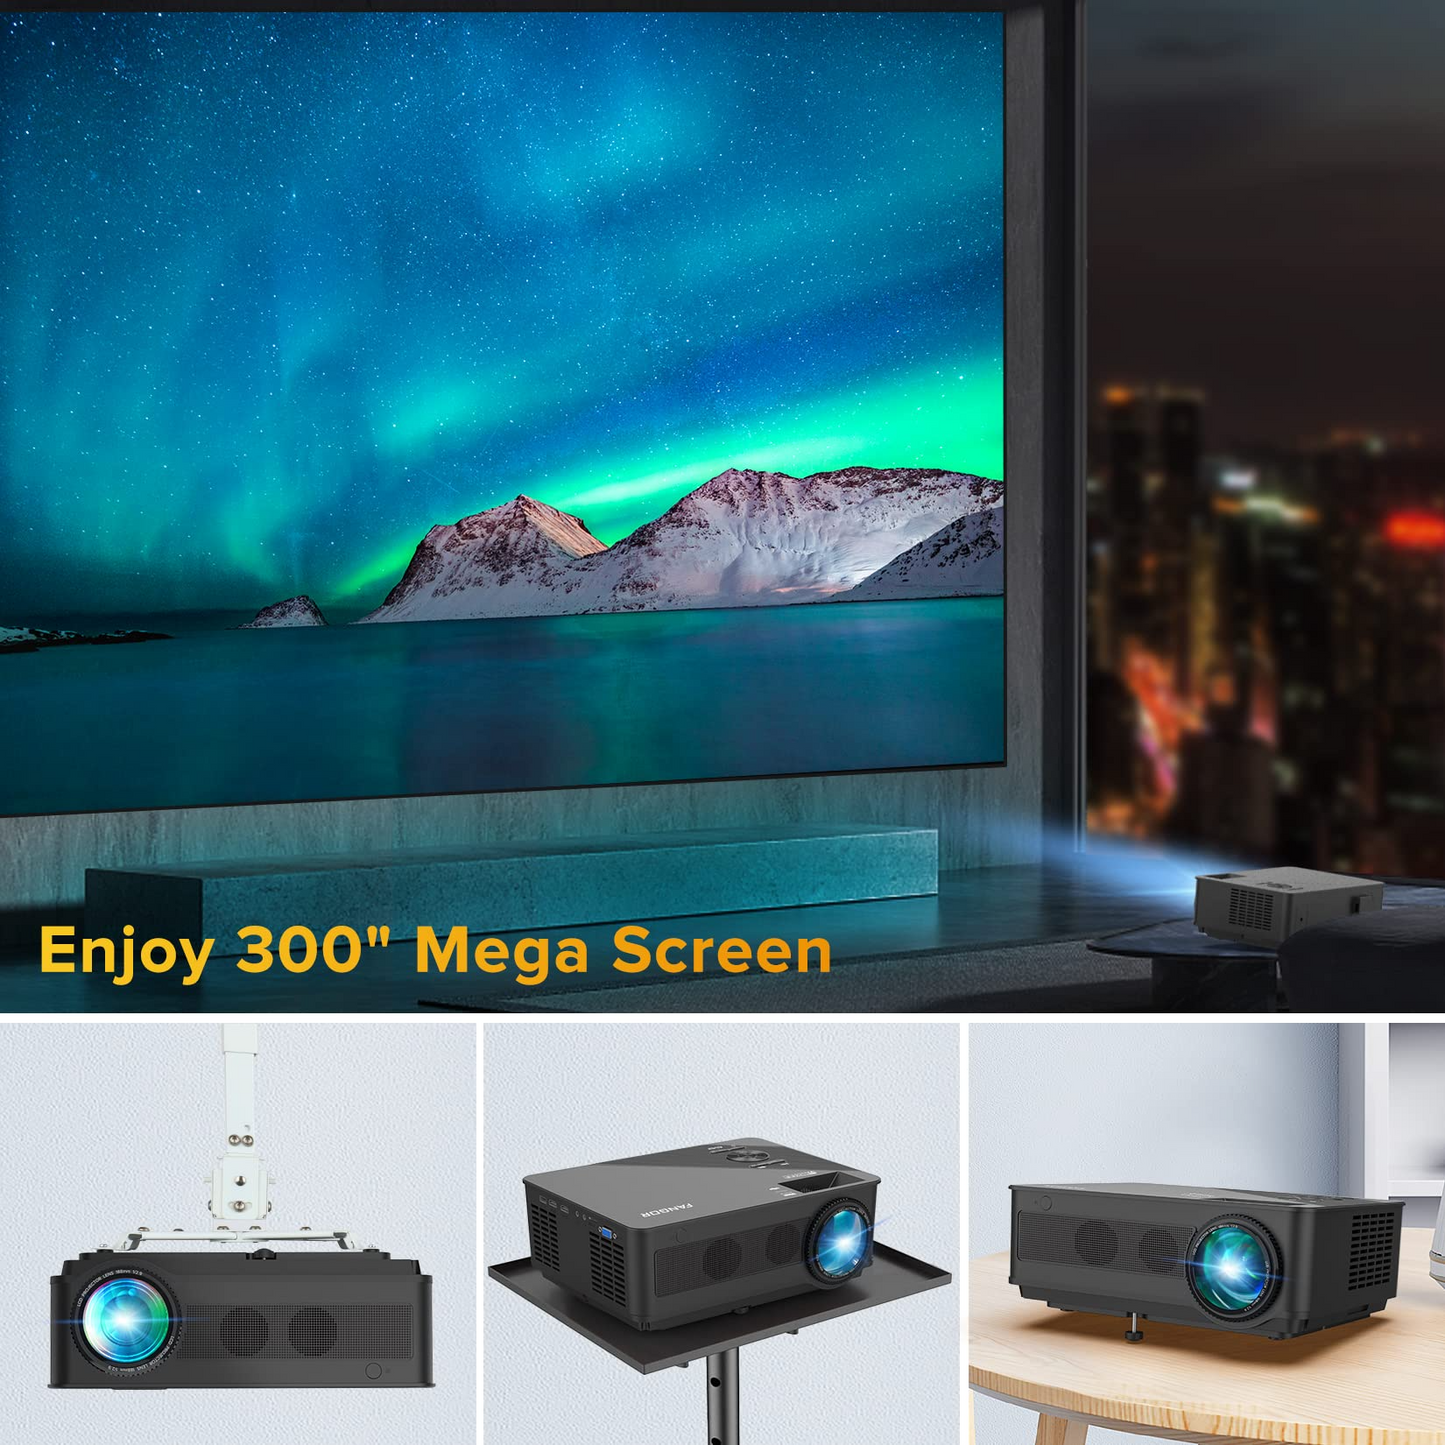 WiFi Bluetooth Projector - 1080P Native HD Projector Outdoor Movie Projector Support 300" Screen, FANGOR 6" TFT Panel Home Theater Video Projector with HiFi Stereo for Smartphone, DVD, Laptop, PS4